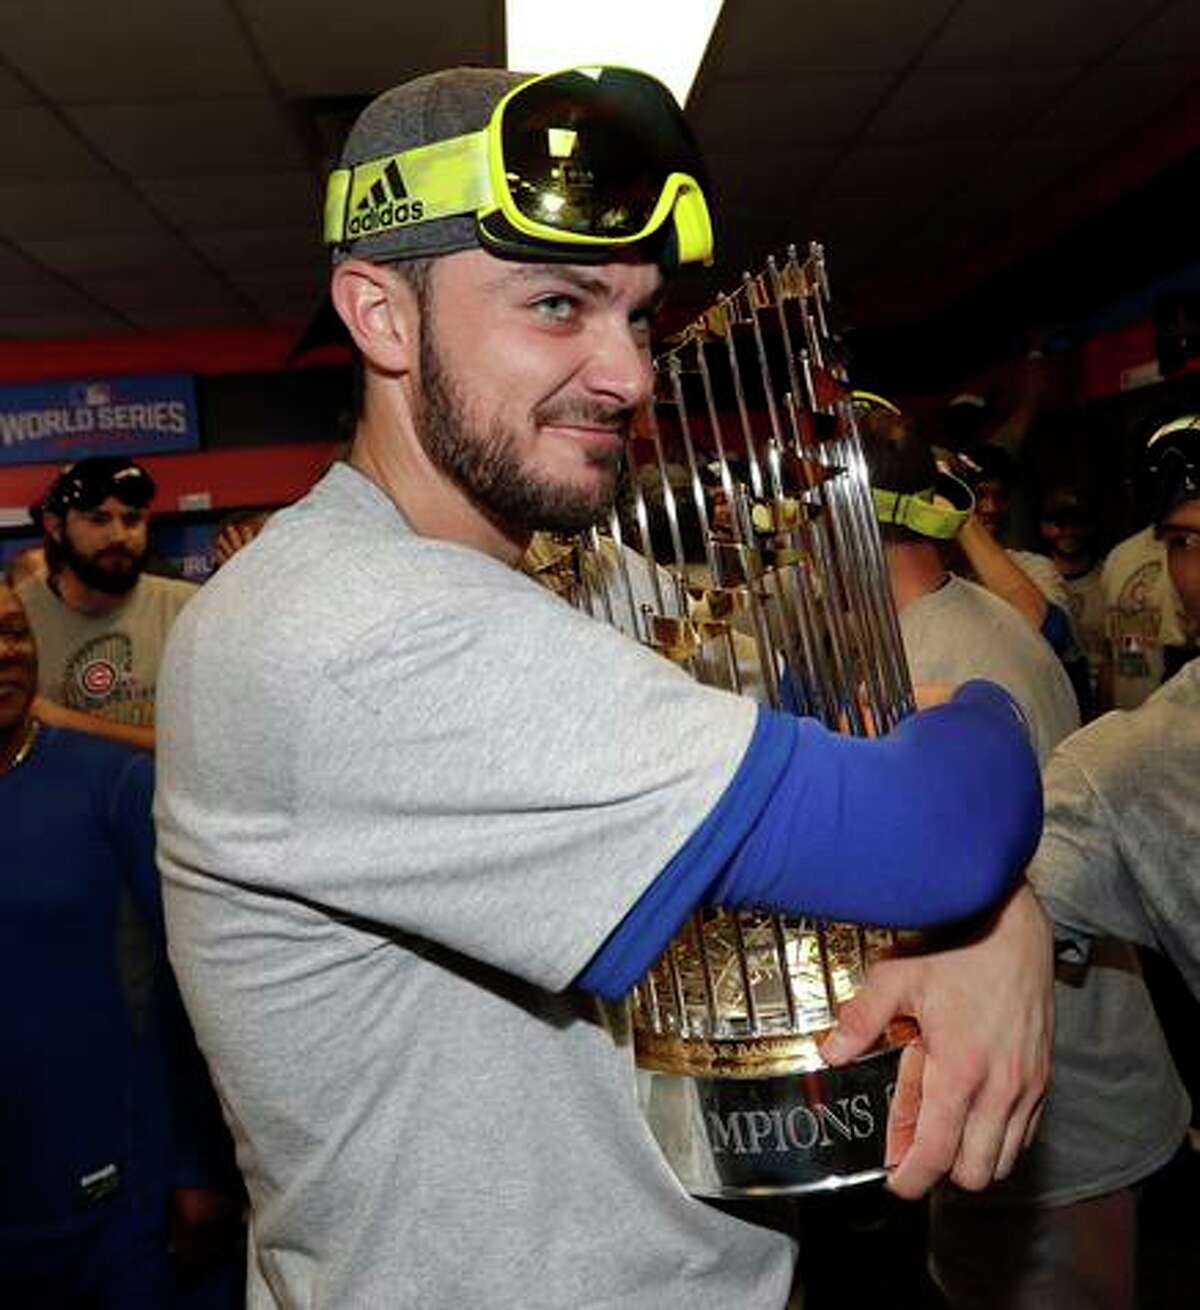 Cubs Complete Selloff, Trade Kris Bryant to Giants For Two Prospects —  College Baseball, MLB Draft, Prospects - Baseball America